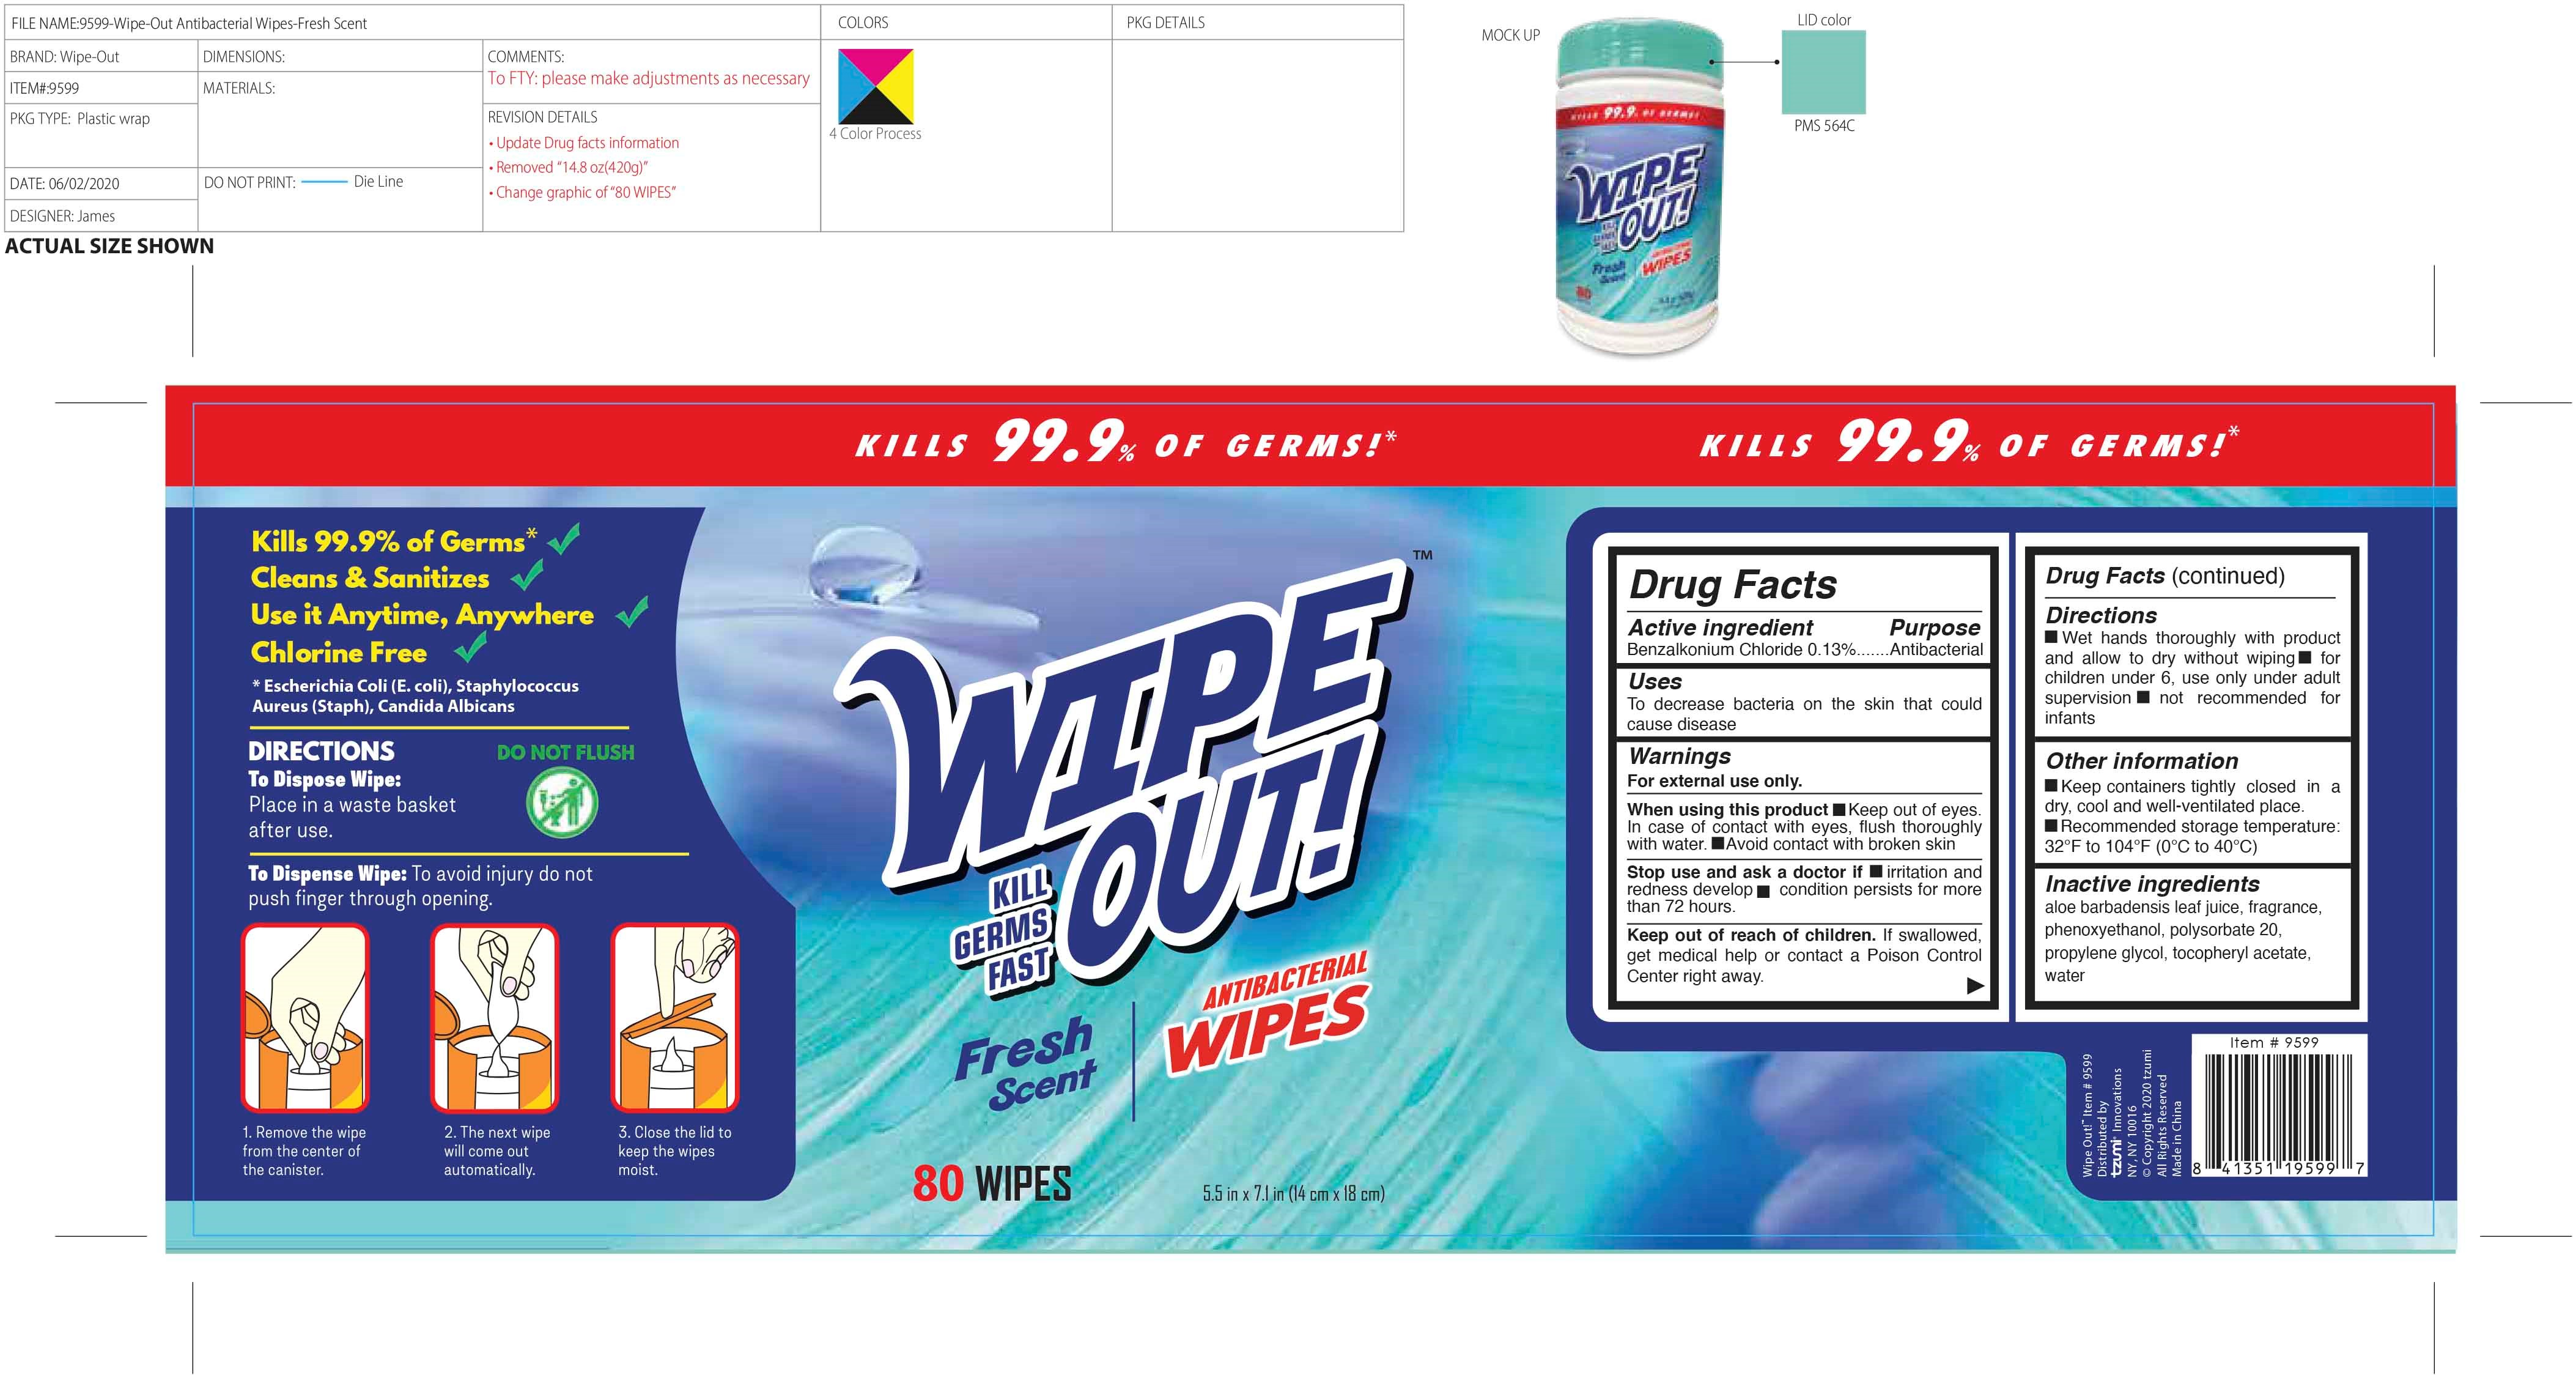 WIPE OUT ANTIBACTERIAL WIPES FRESH SCENT- benzalkonium chloride solution